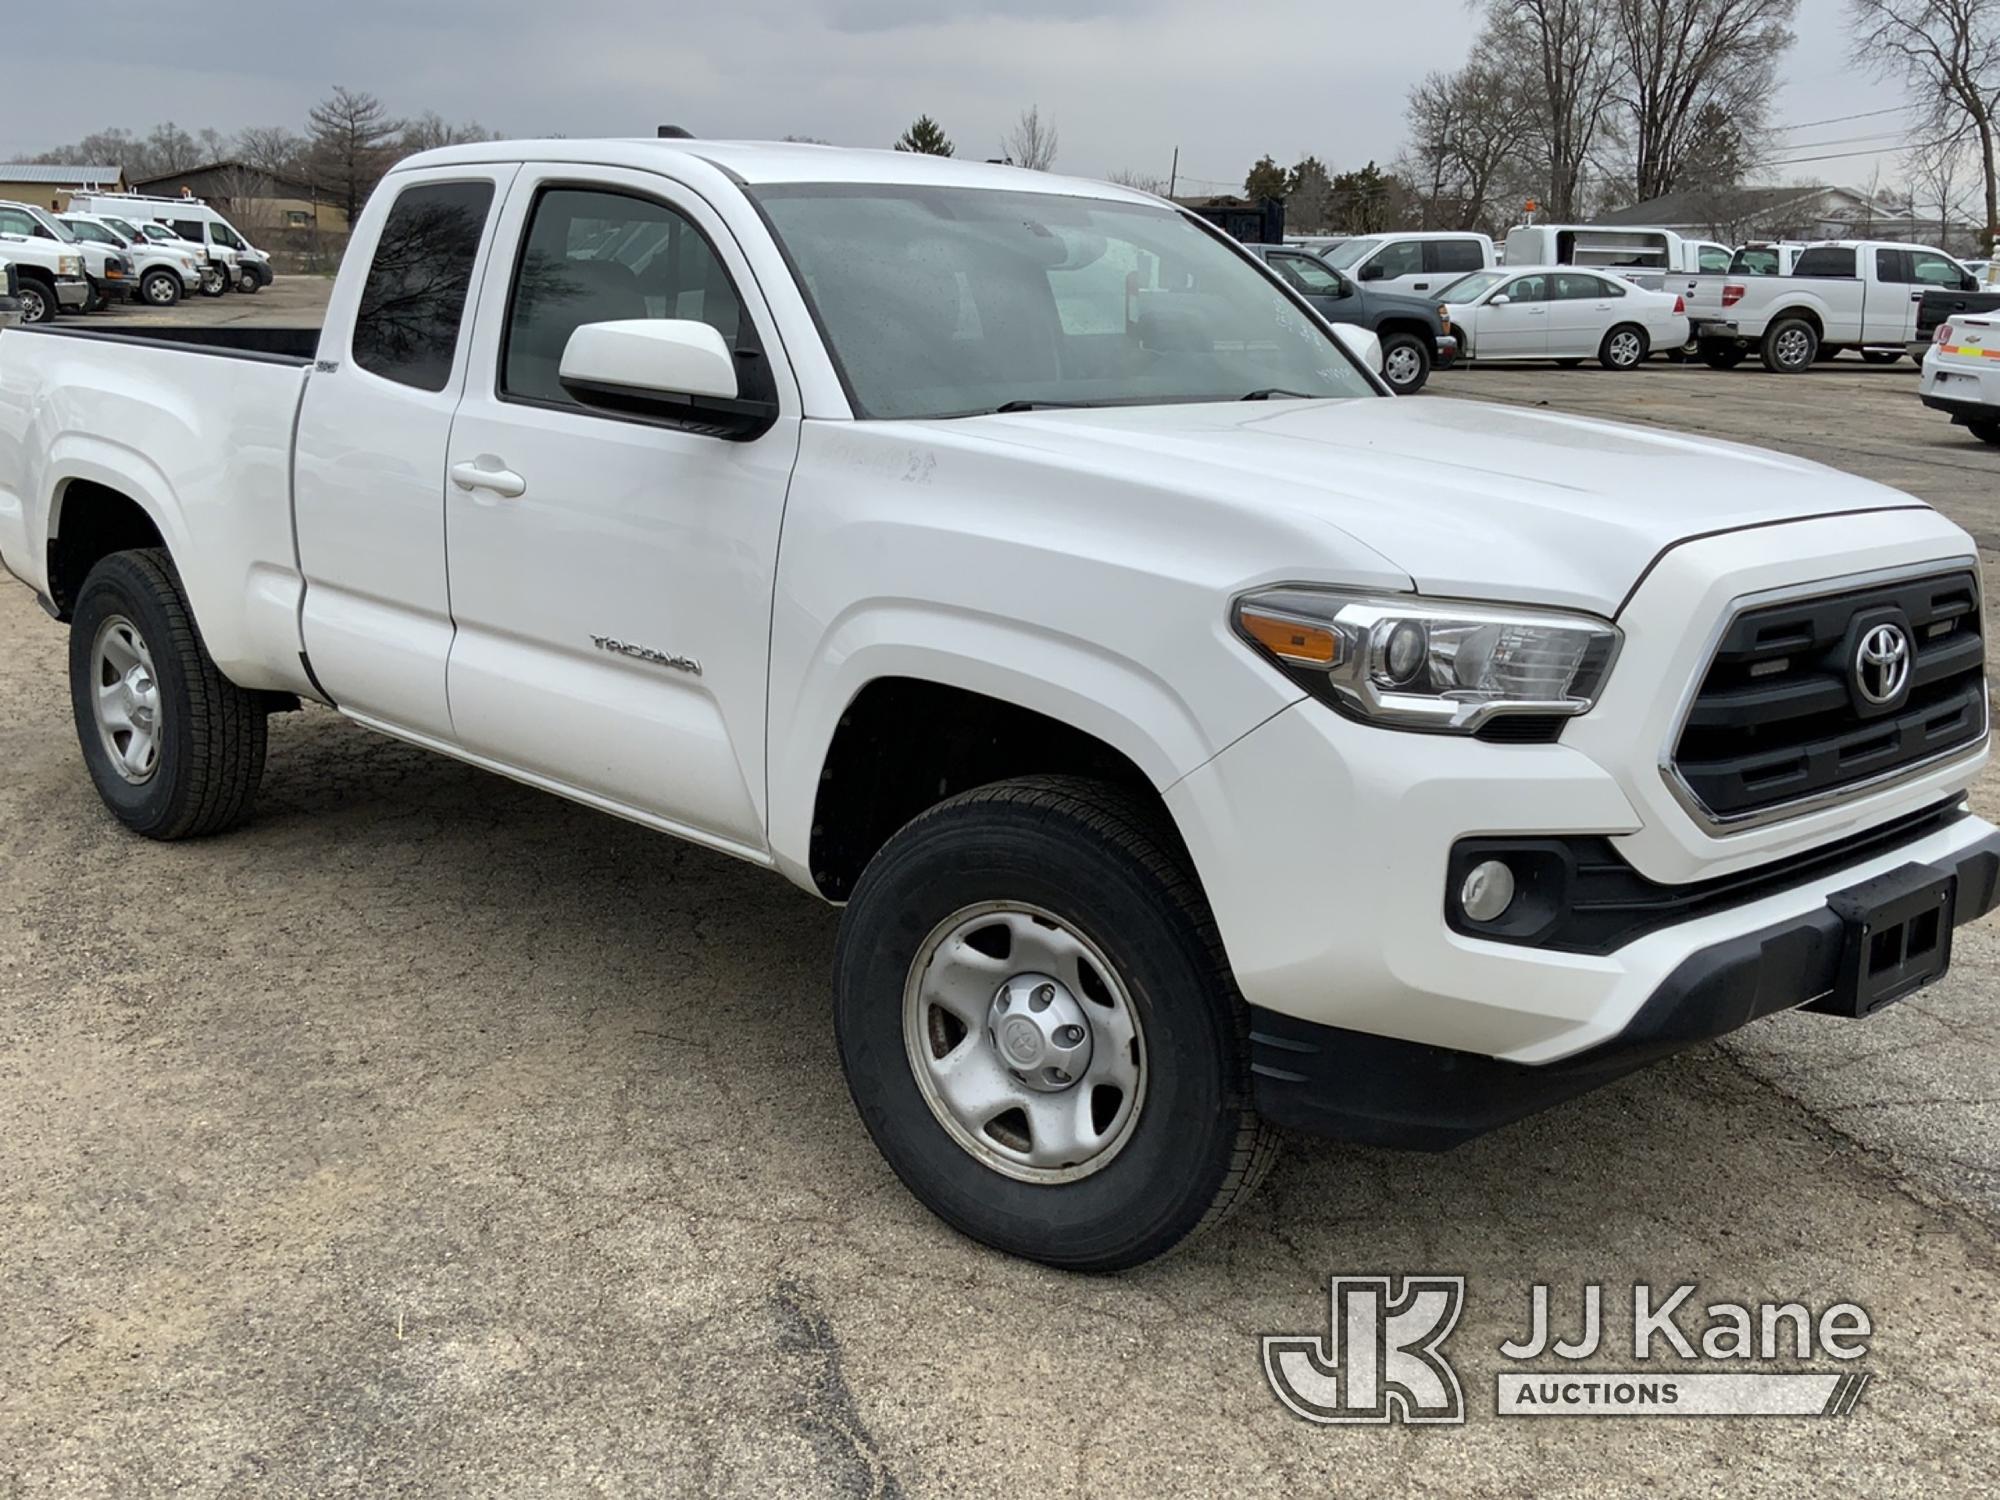 (South Beloit, IL) 2016 Toyota Tacoma 4x4 Extended-Cab Pickup Truck Runs & Moves) (Jump to Start